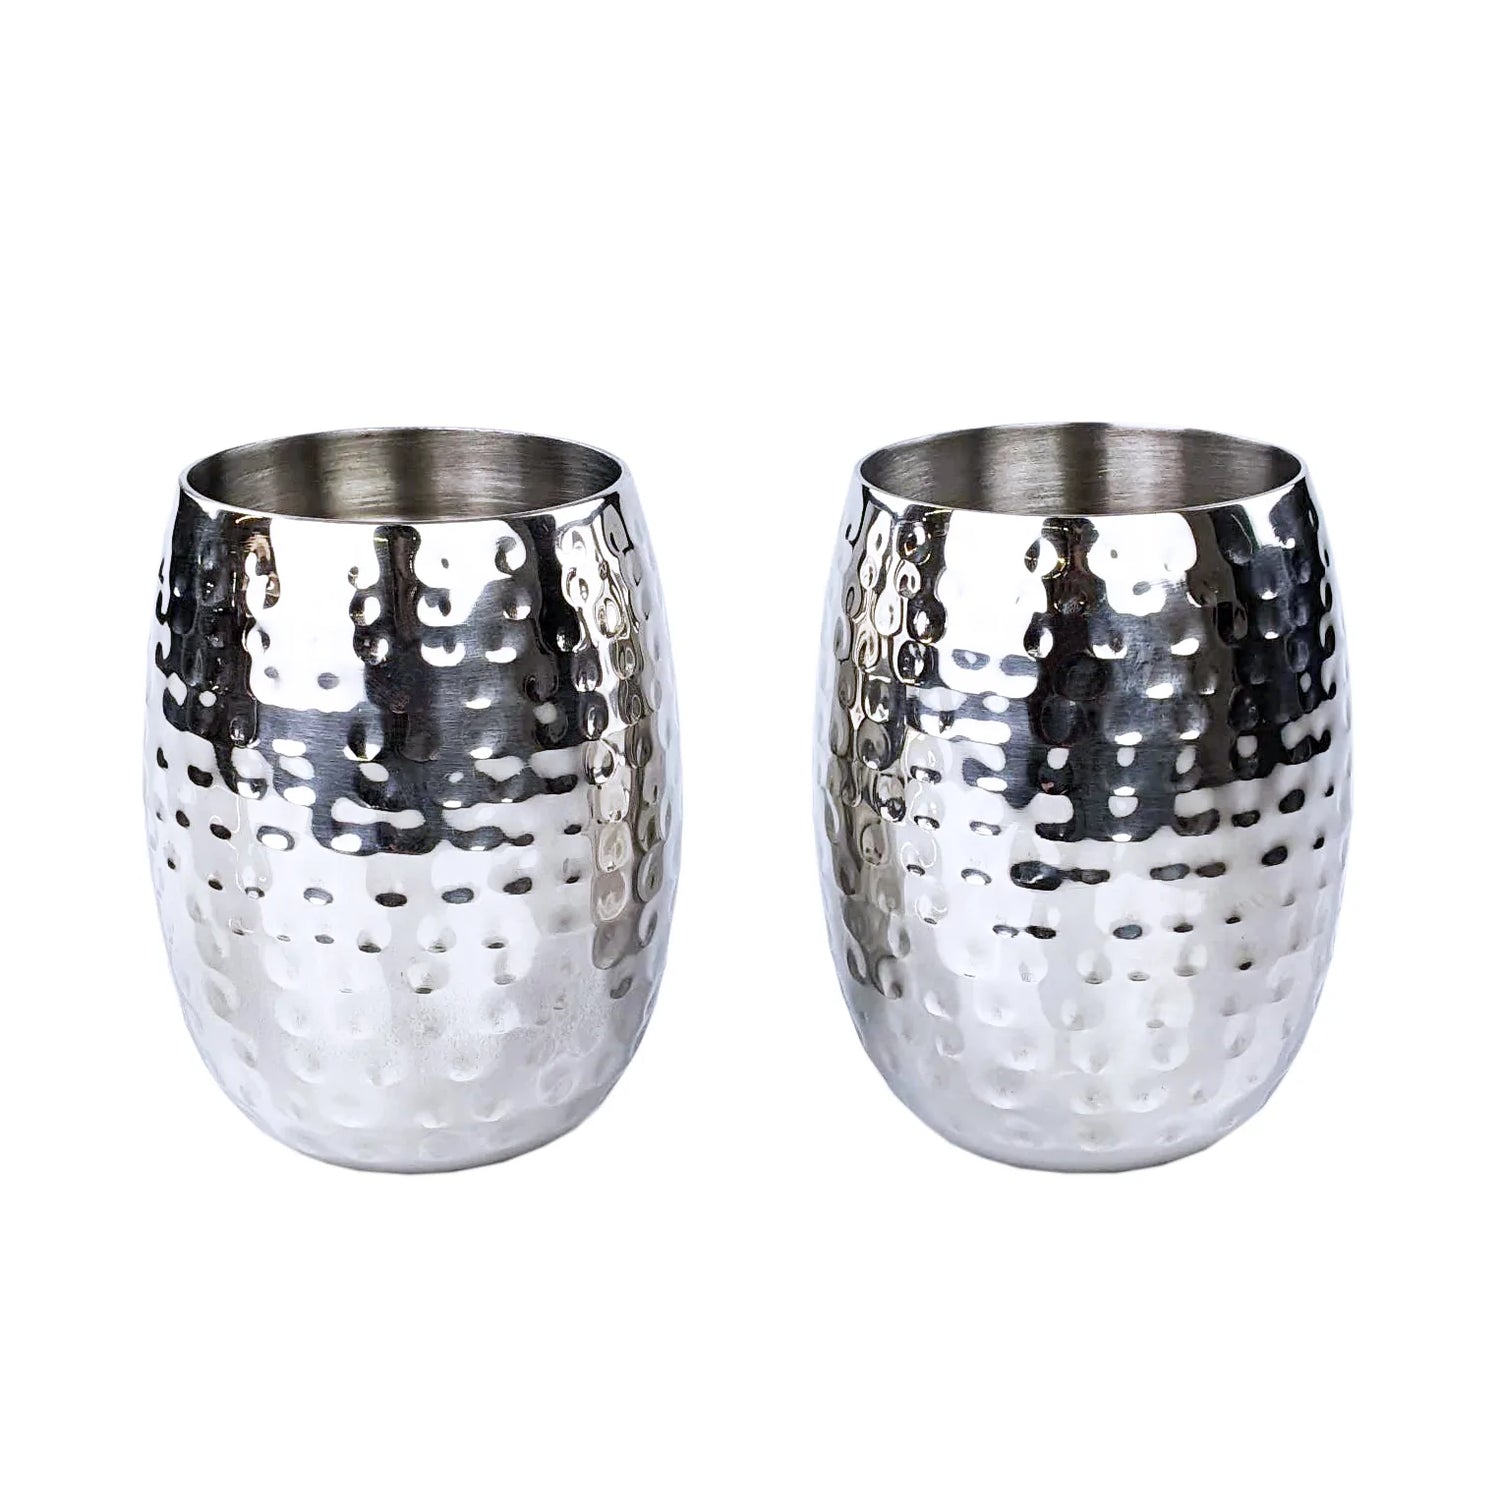 Metal cups set of 2 made of stainless steel to use for drinks, cocktails, beer, or wine.  Large size and hammered exterior.  Popular for moscow mules and sangria drinks.  use in the bar, kitchen, dining room, or patio to keep drinks extra cold at your next wedding, anniversary, or birthday party.